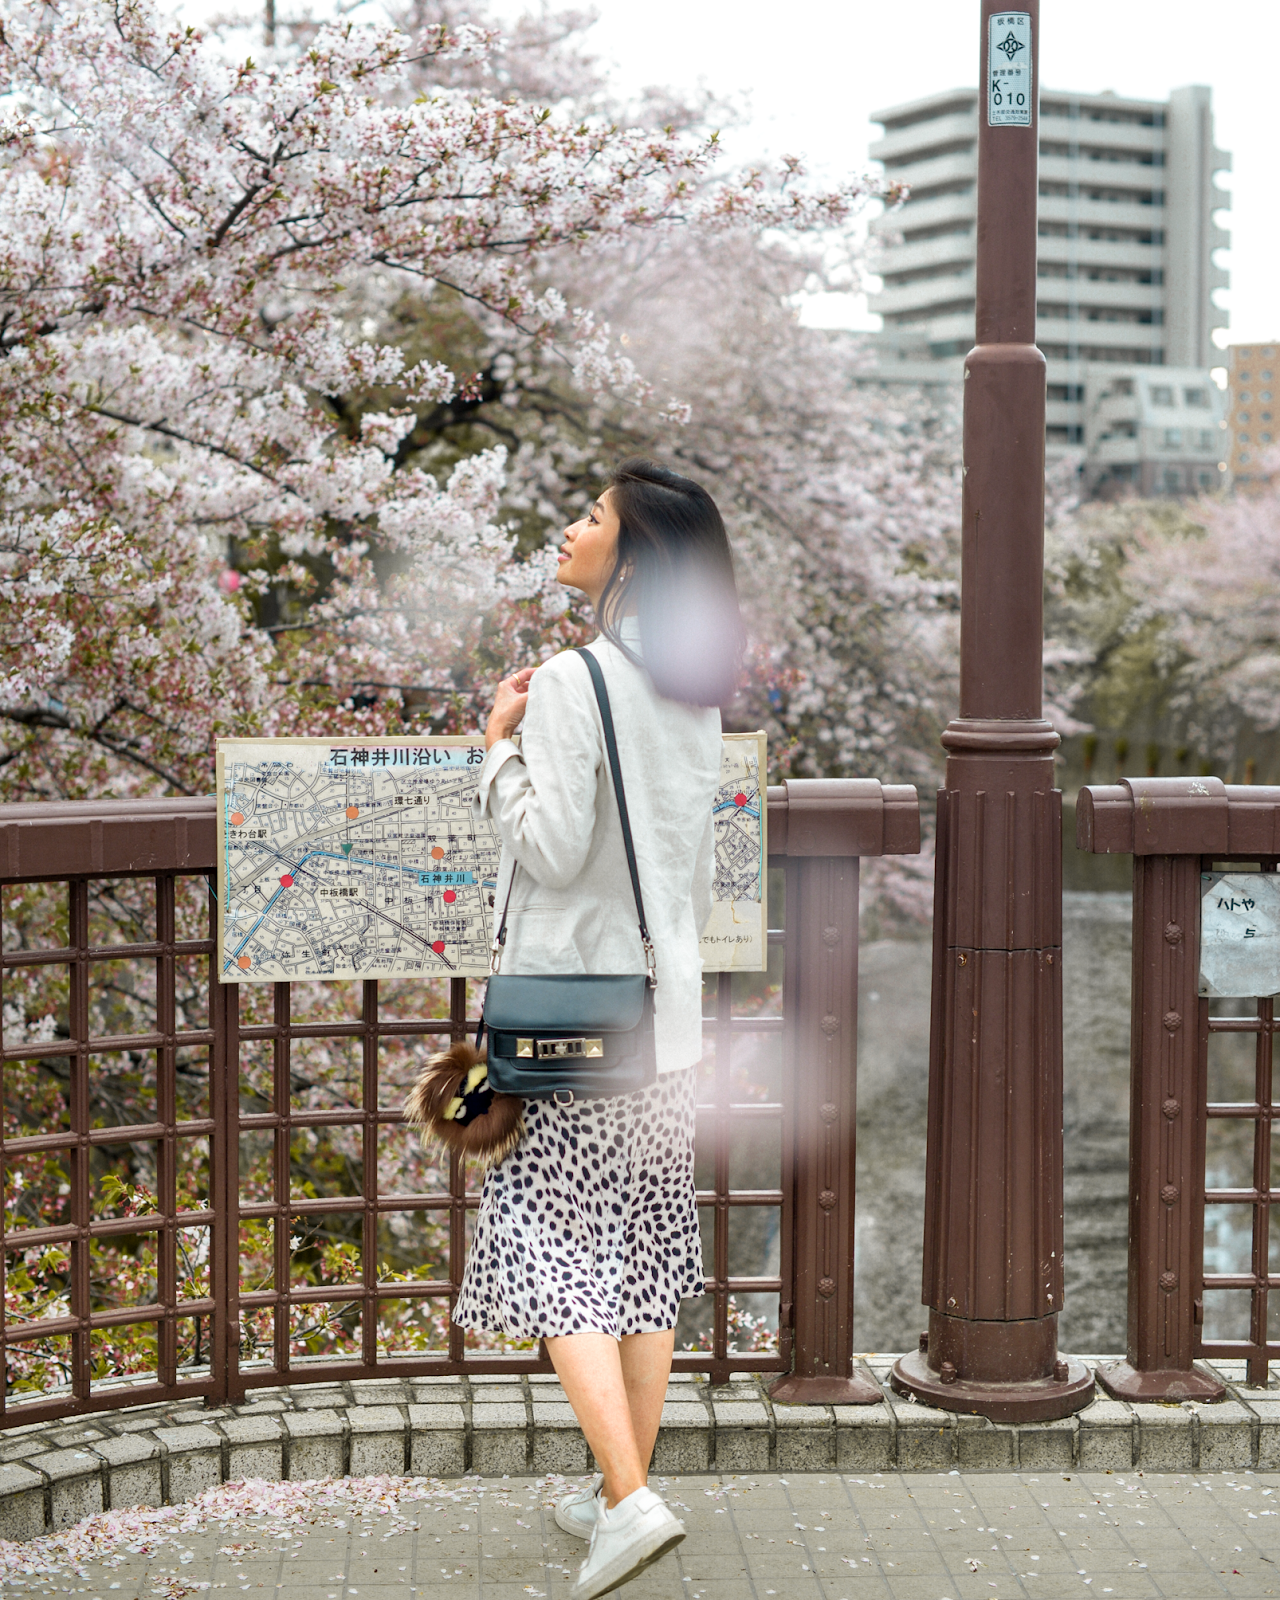 Cherry blossoms viewing locally, neighborhood cherry blossom spots, Itabashi Tokyo, personal style blog FOREVERVANNY